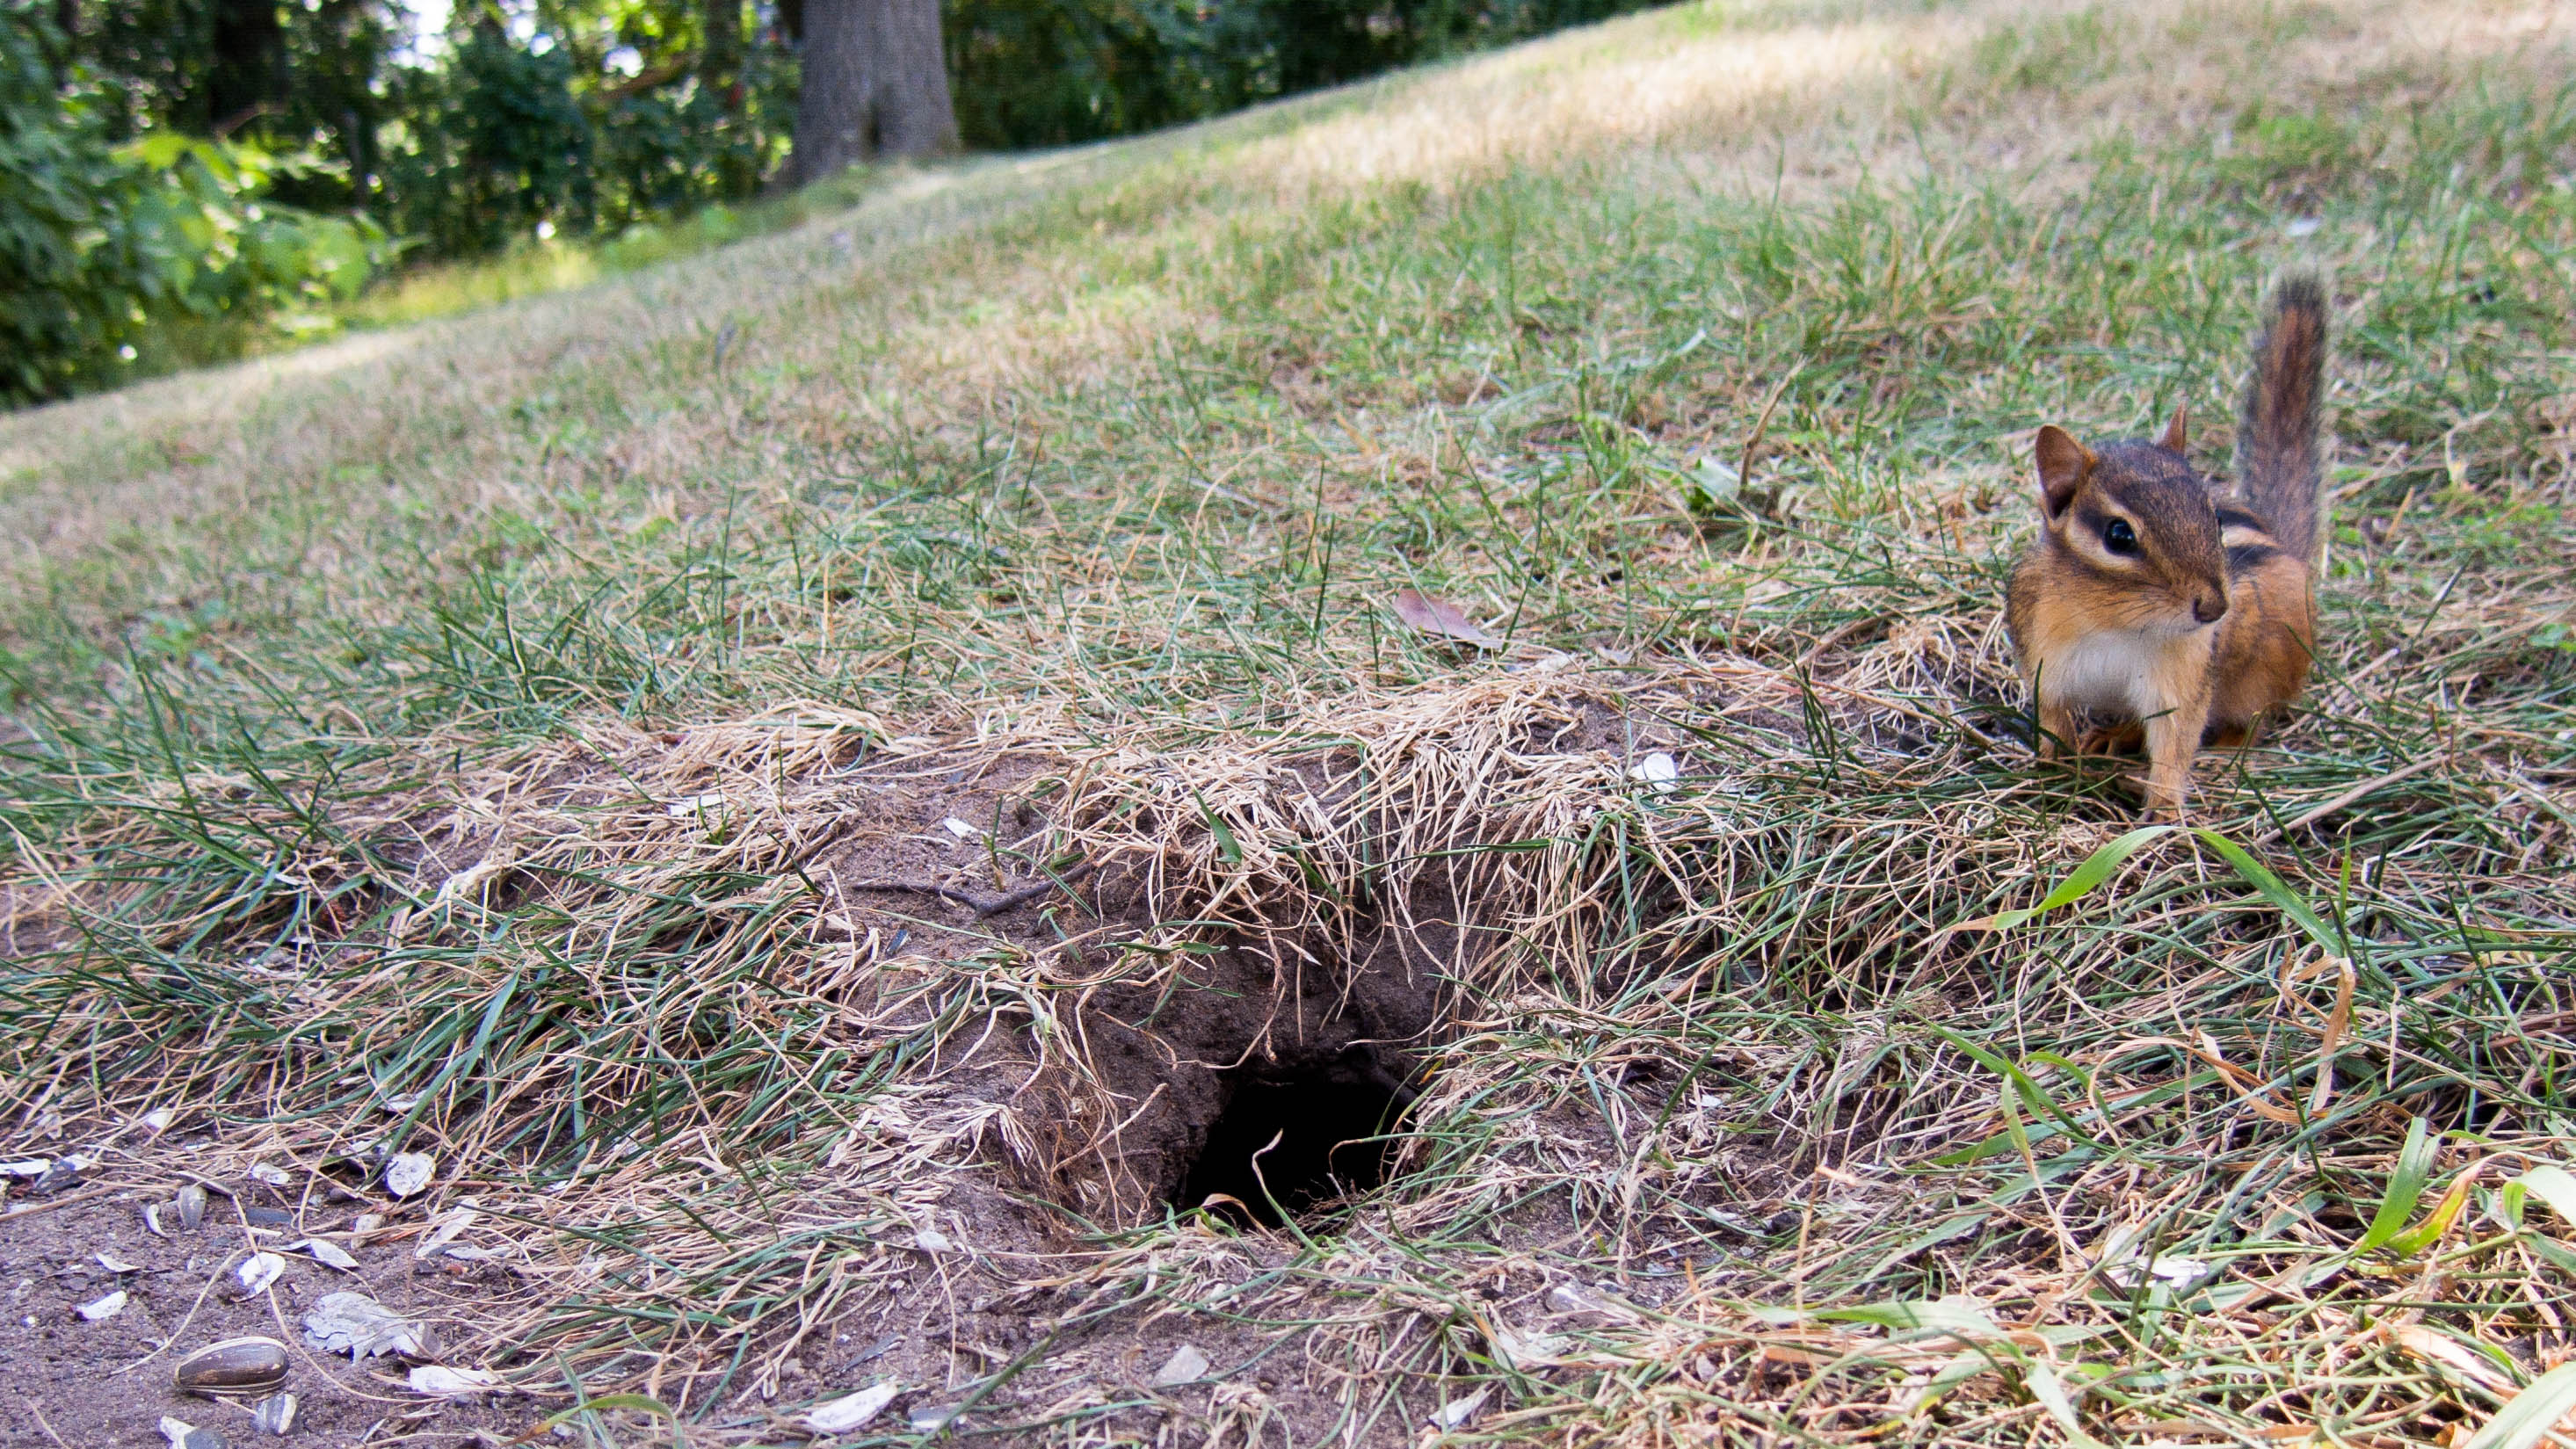 A chipmunk next to its hole in the ground